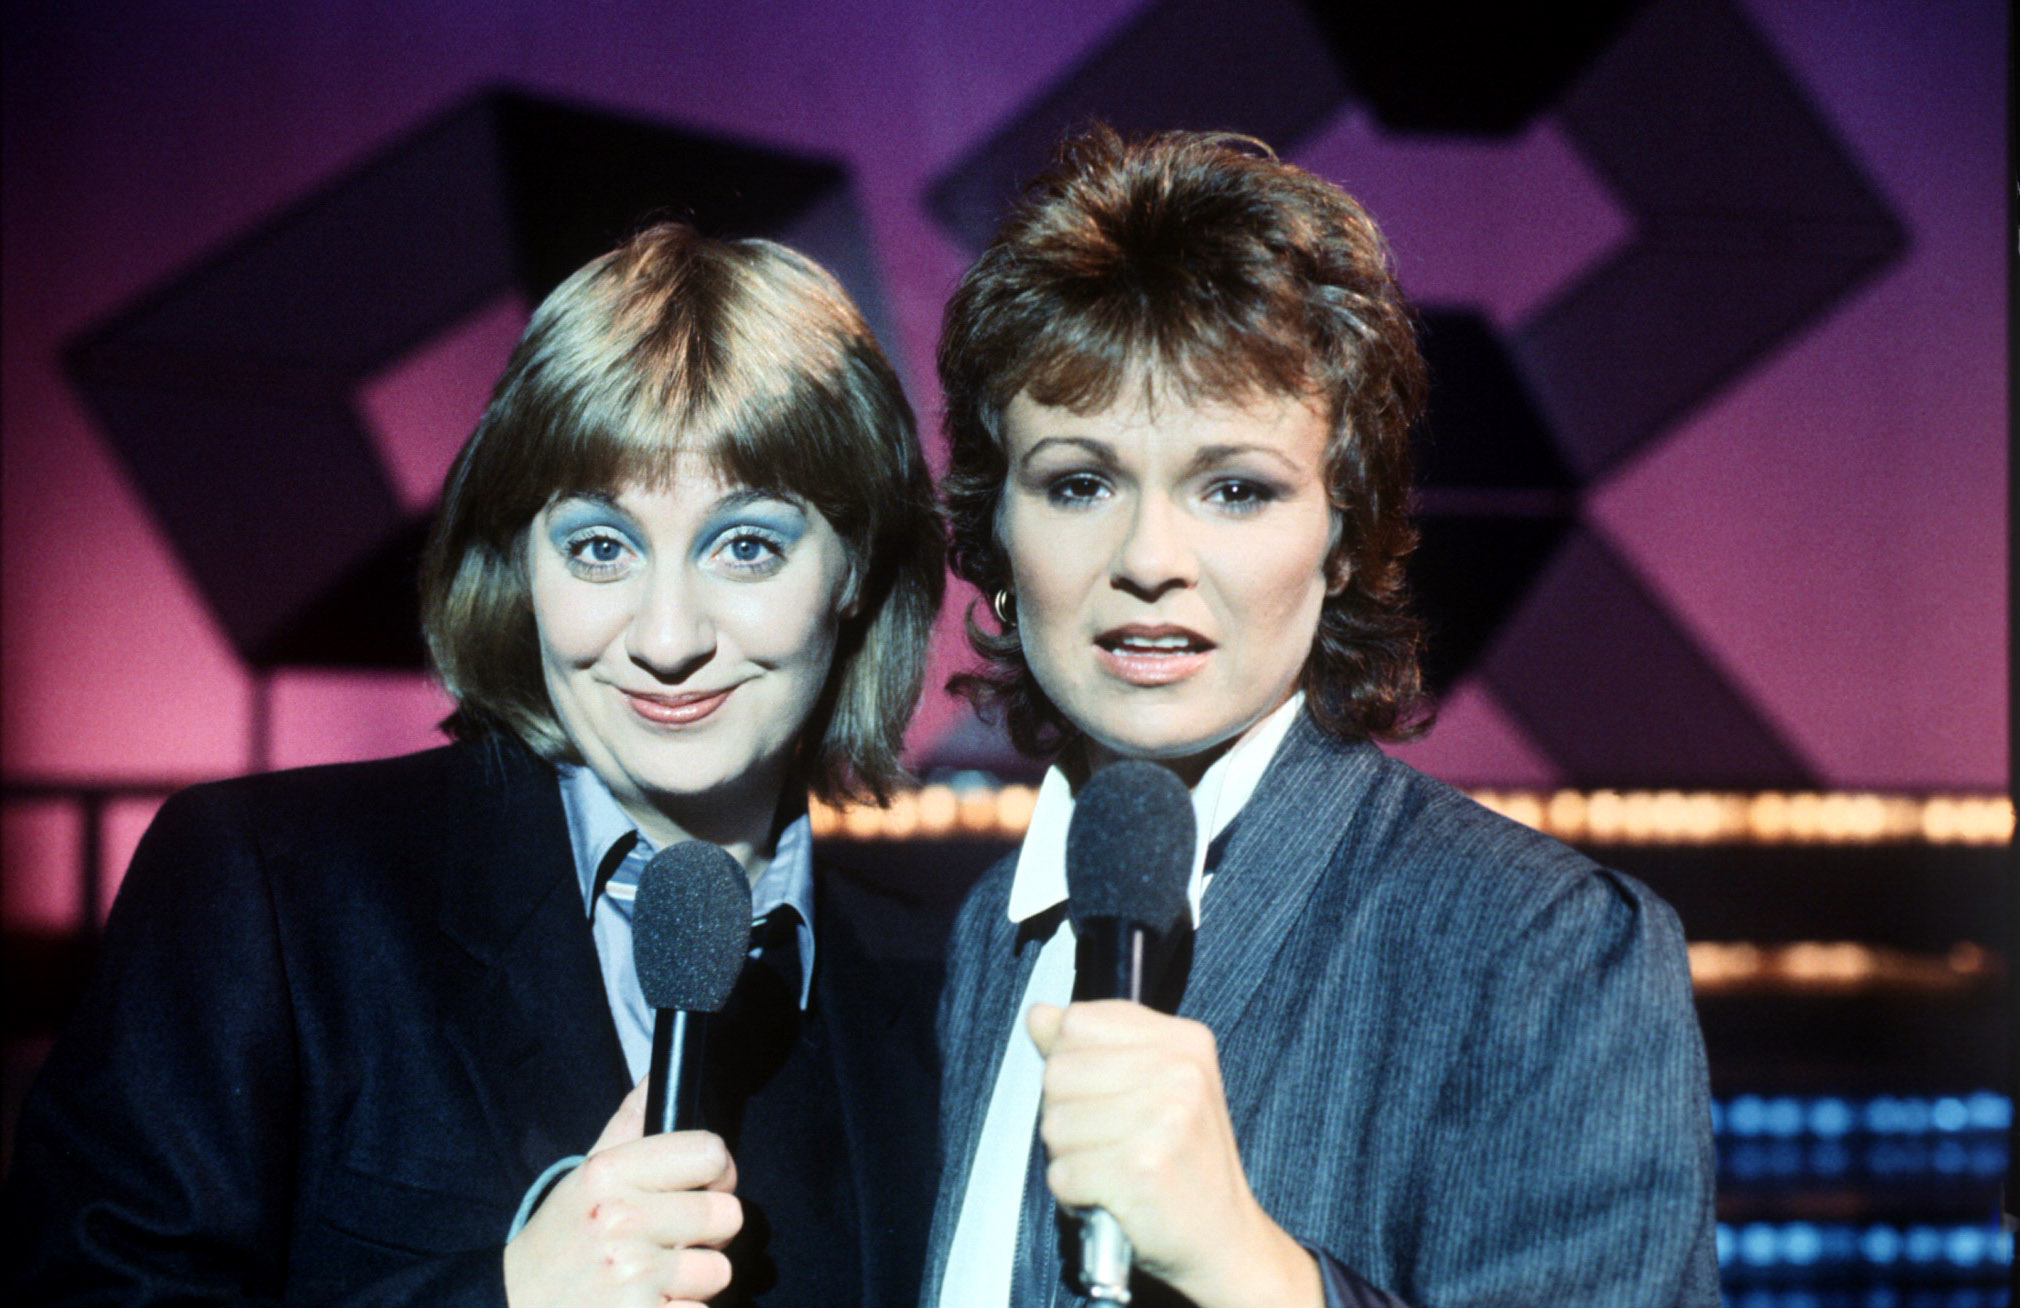 Happy Birthday to Dame Julie Walters (right)!
She is 70 today.
Favourite Julie Walters role? 